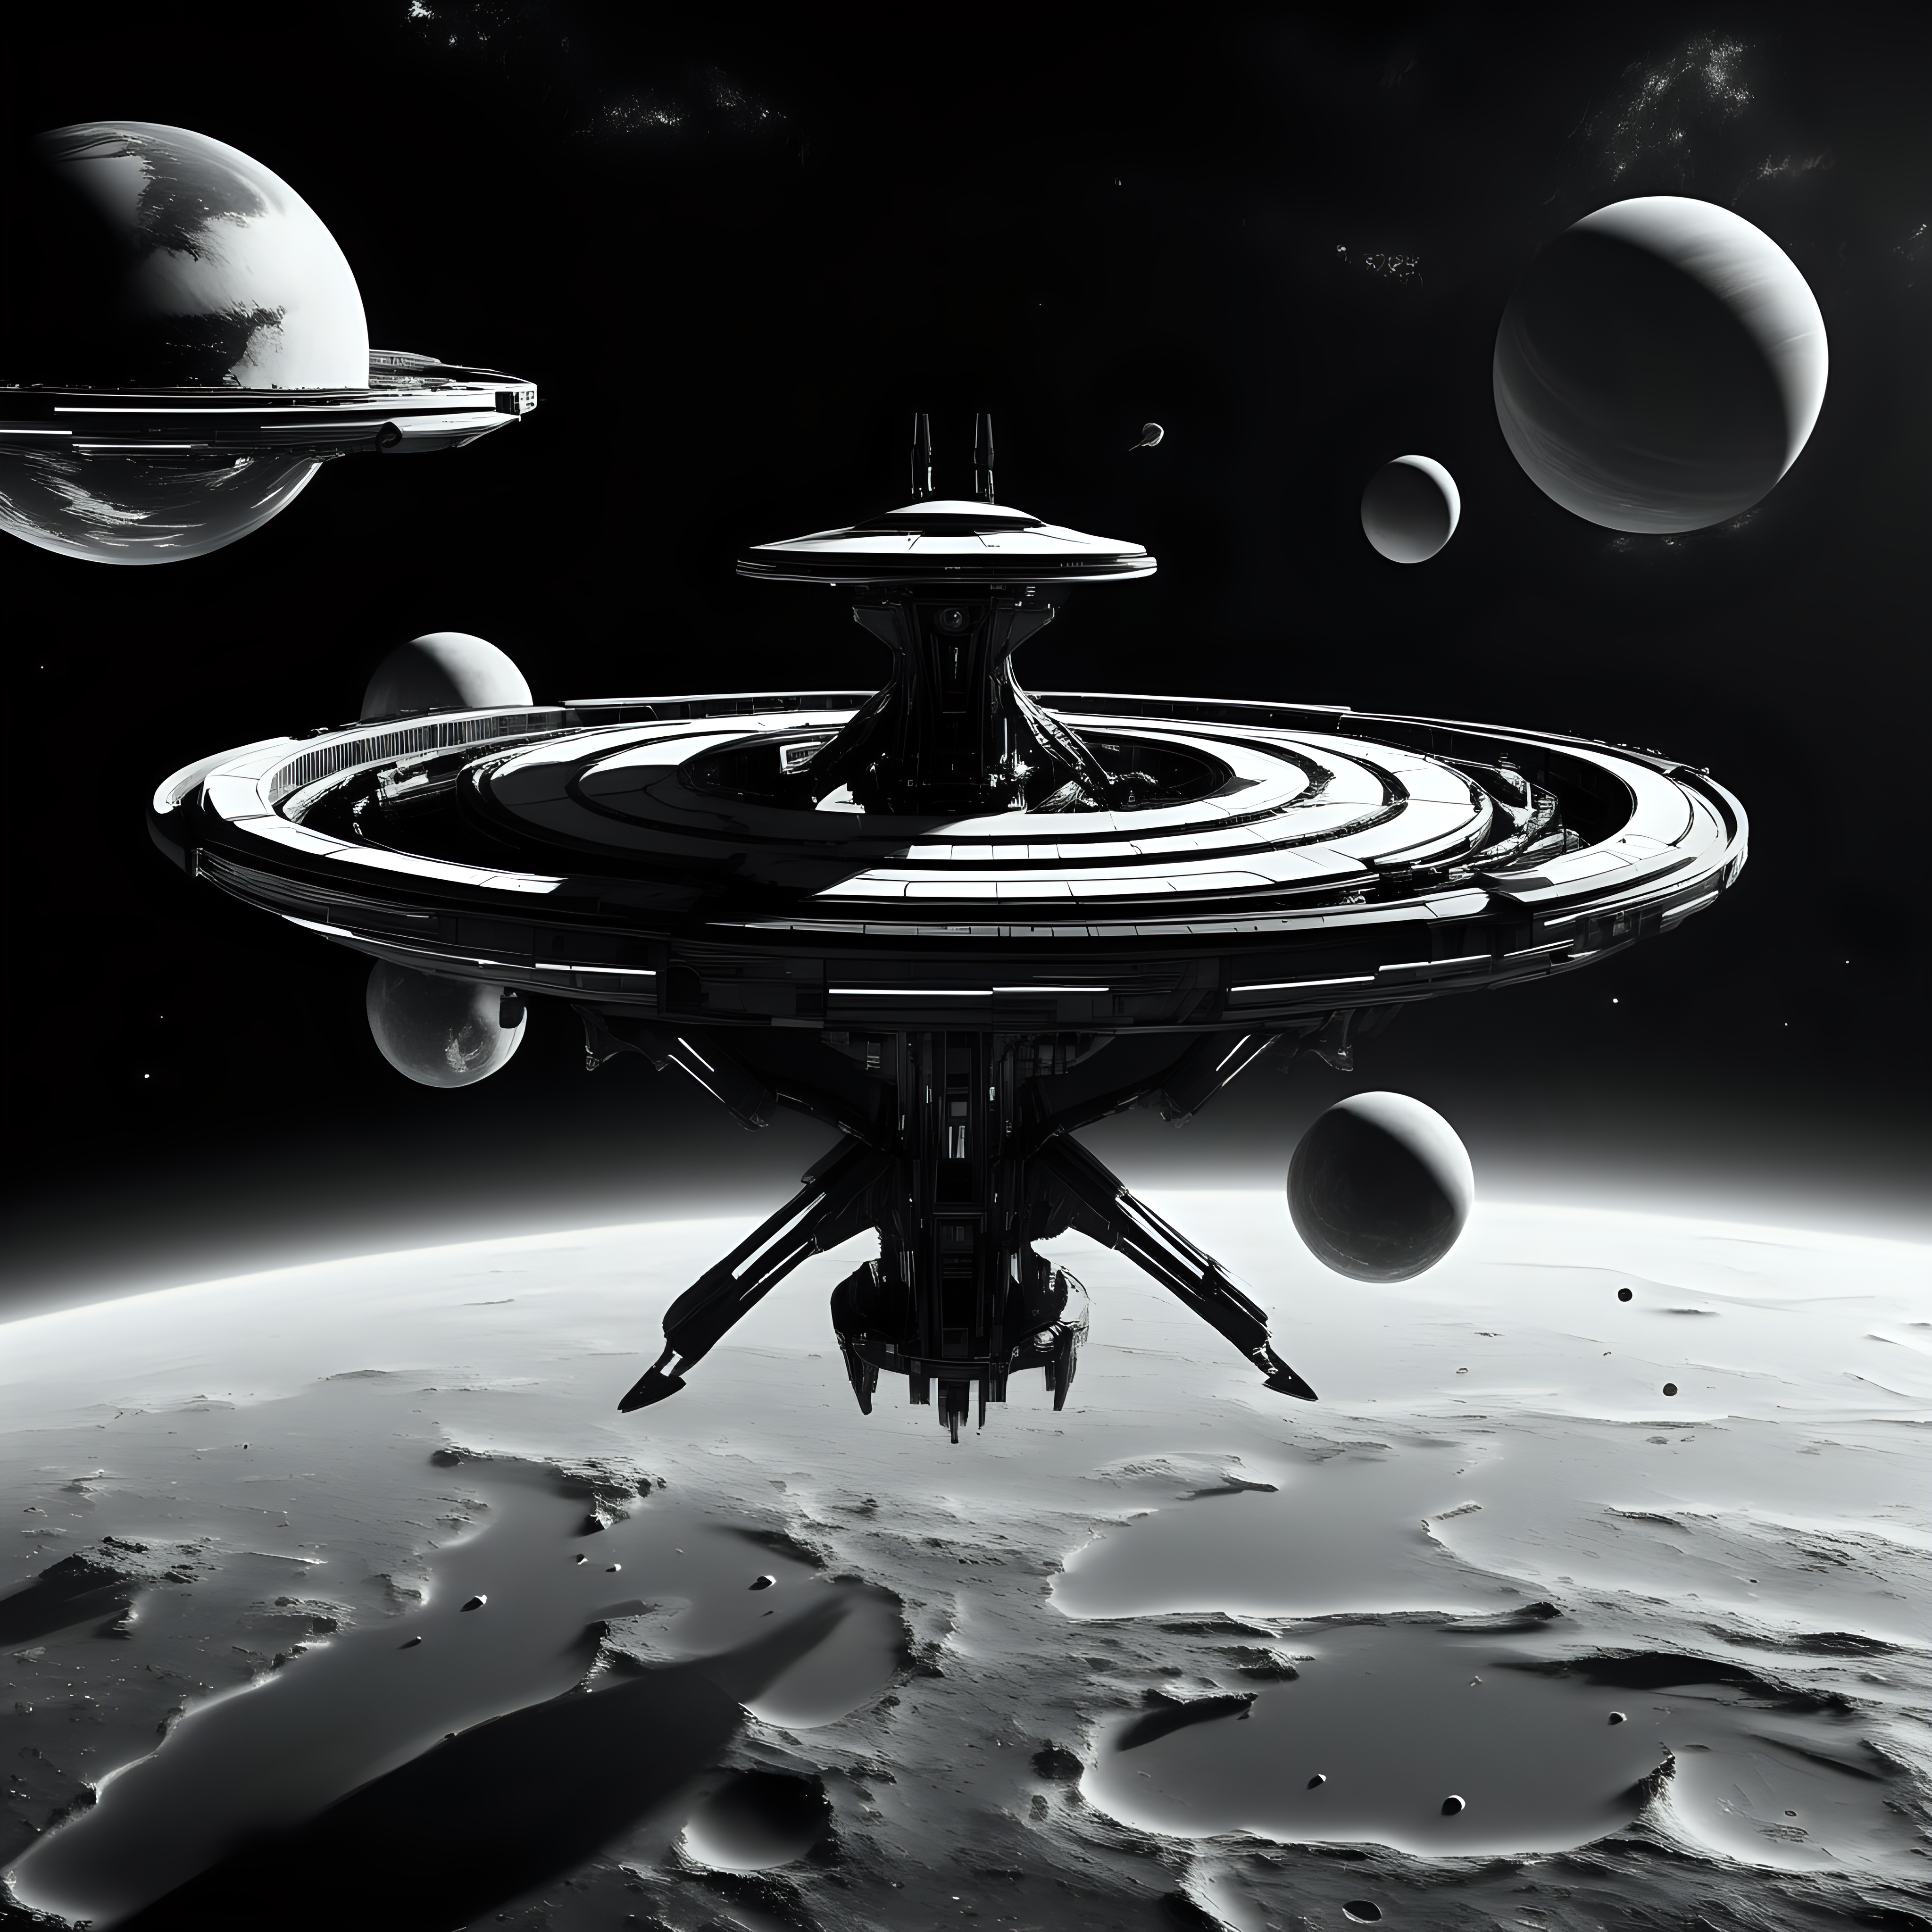 black and white futuristic space weapons platform in orbit with planet in the background